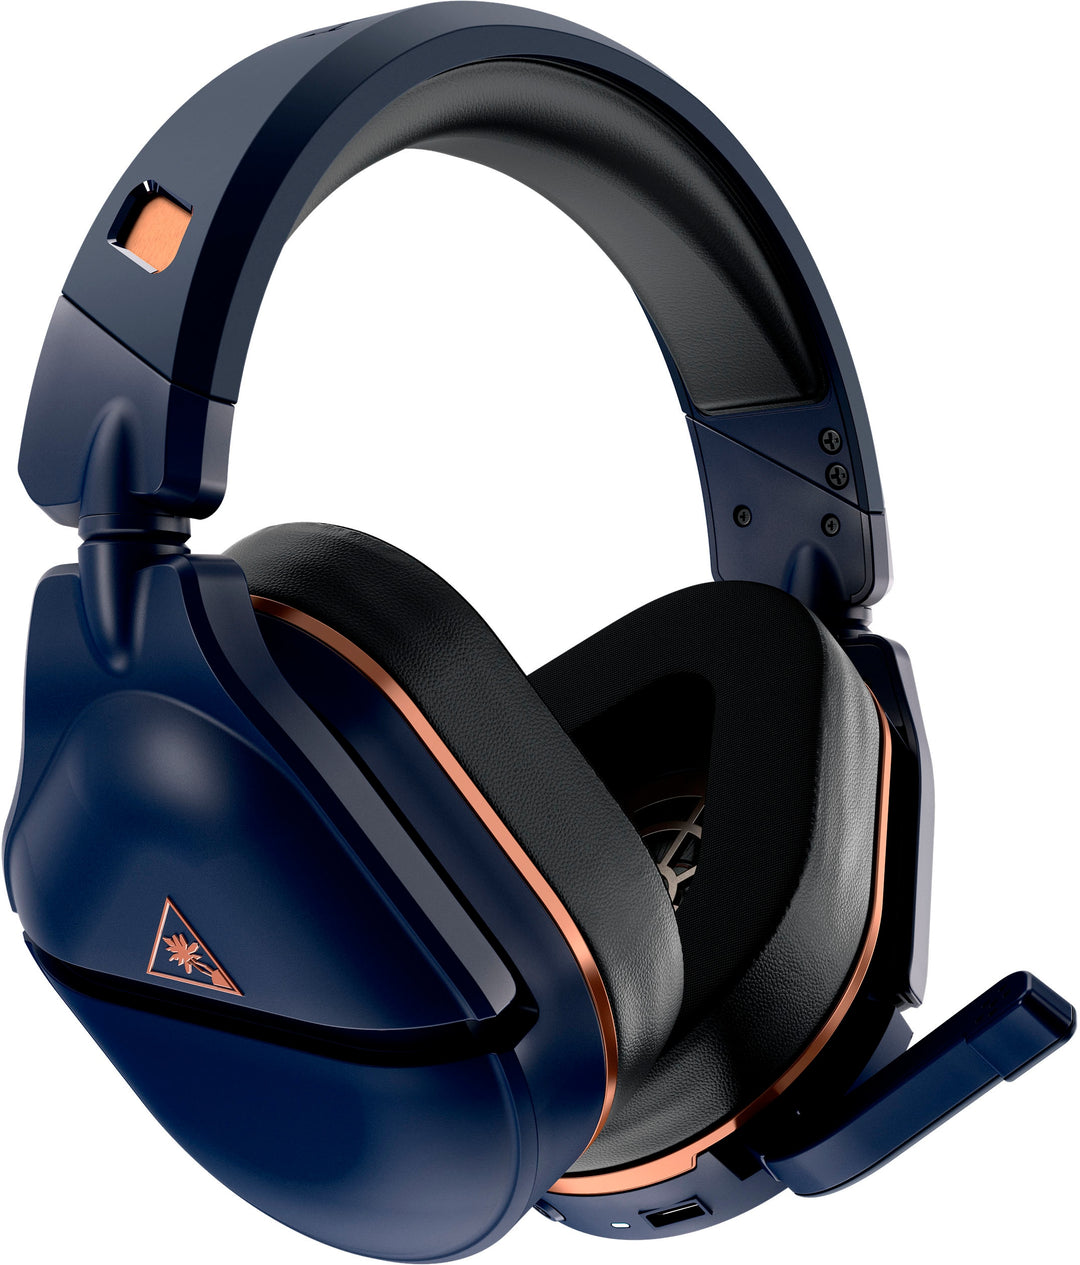 Turtle Beach - Stealth 700 Gen 2 MAX Wireless Multiplatform Gaming Headset for Xbox, PS5, PS4, Nintendo Switch, PC,  40+ Hour Battery - Cobalt Blue_2